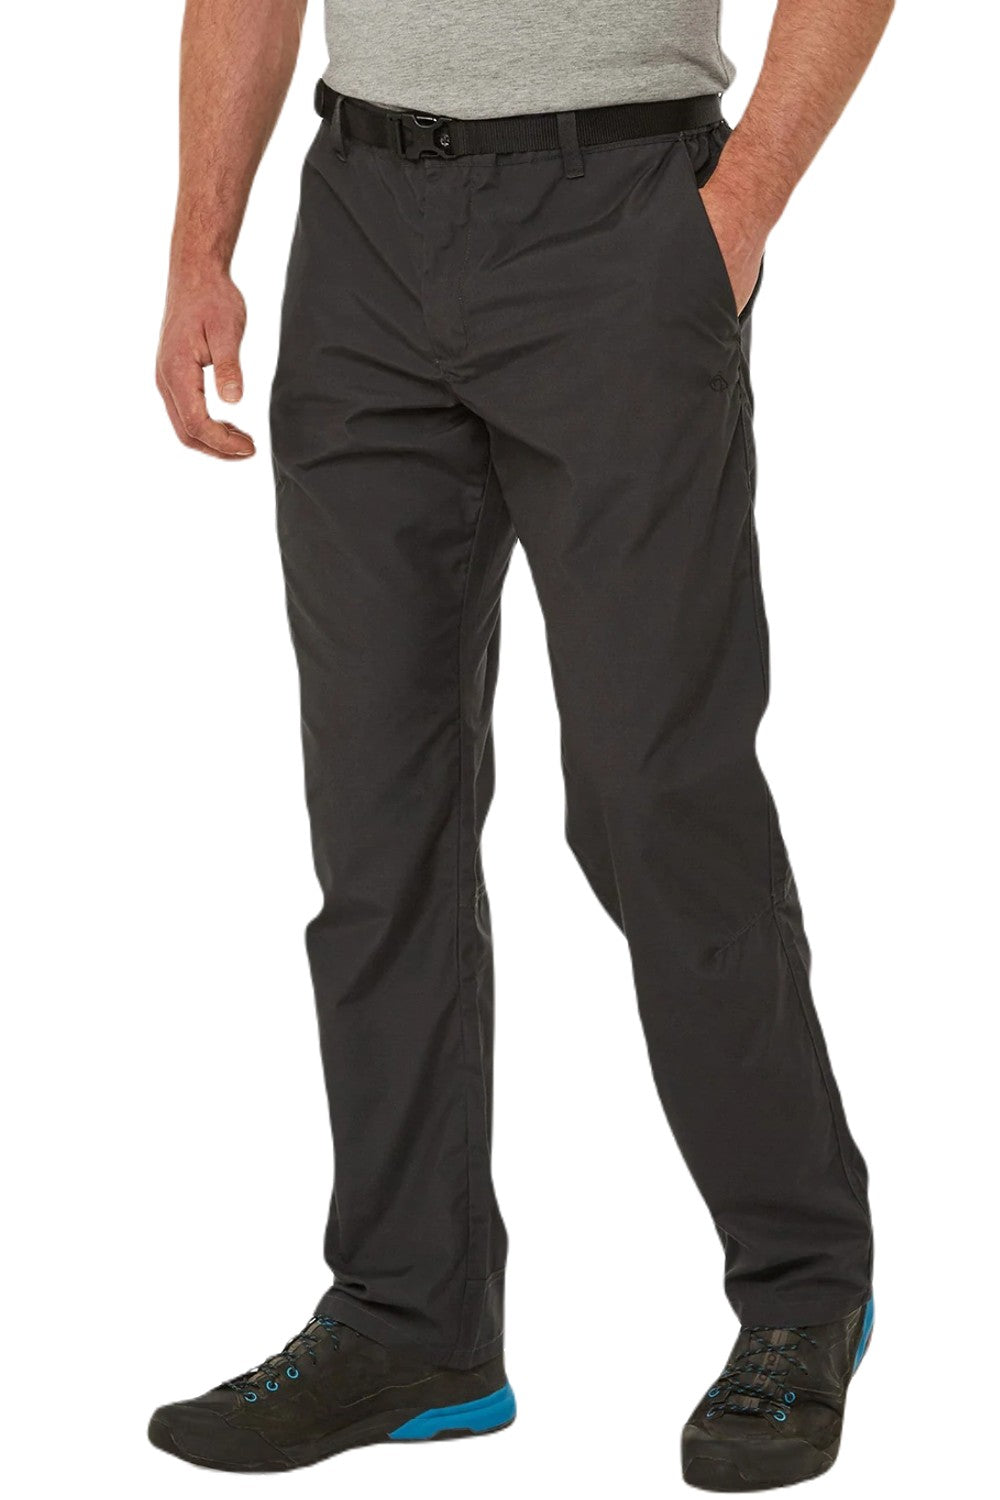 craghoppers walking trousers mens